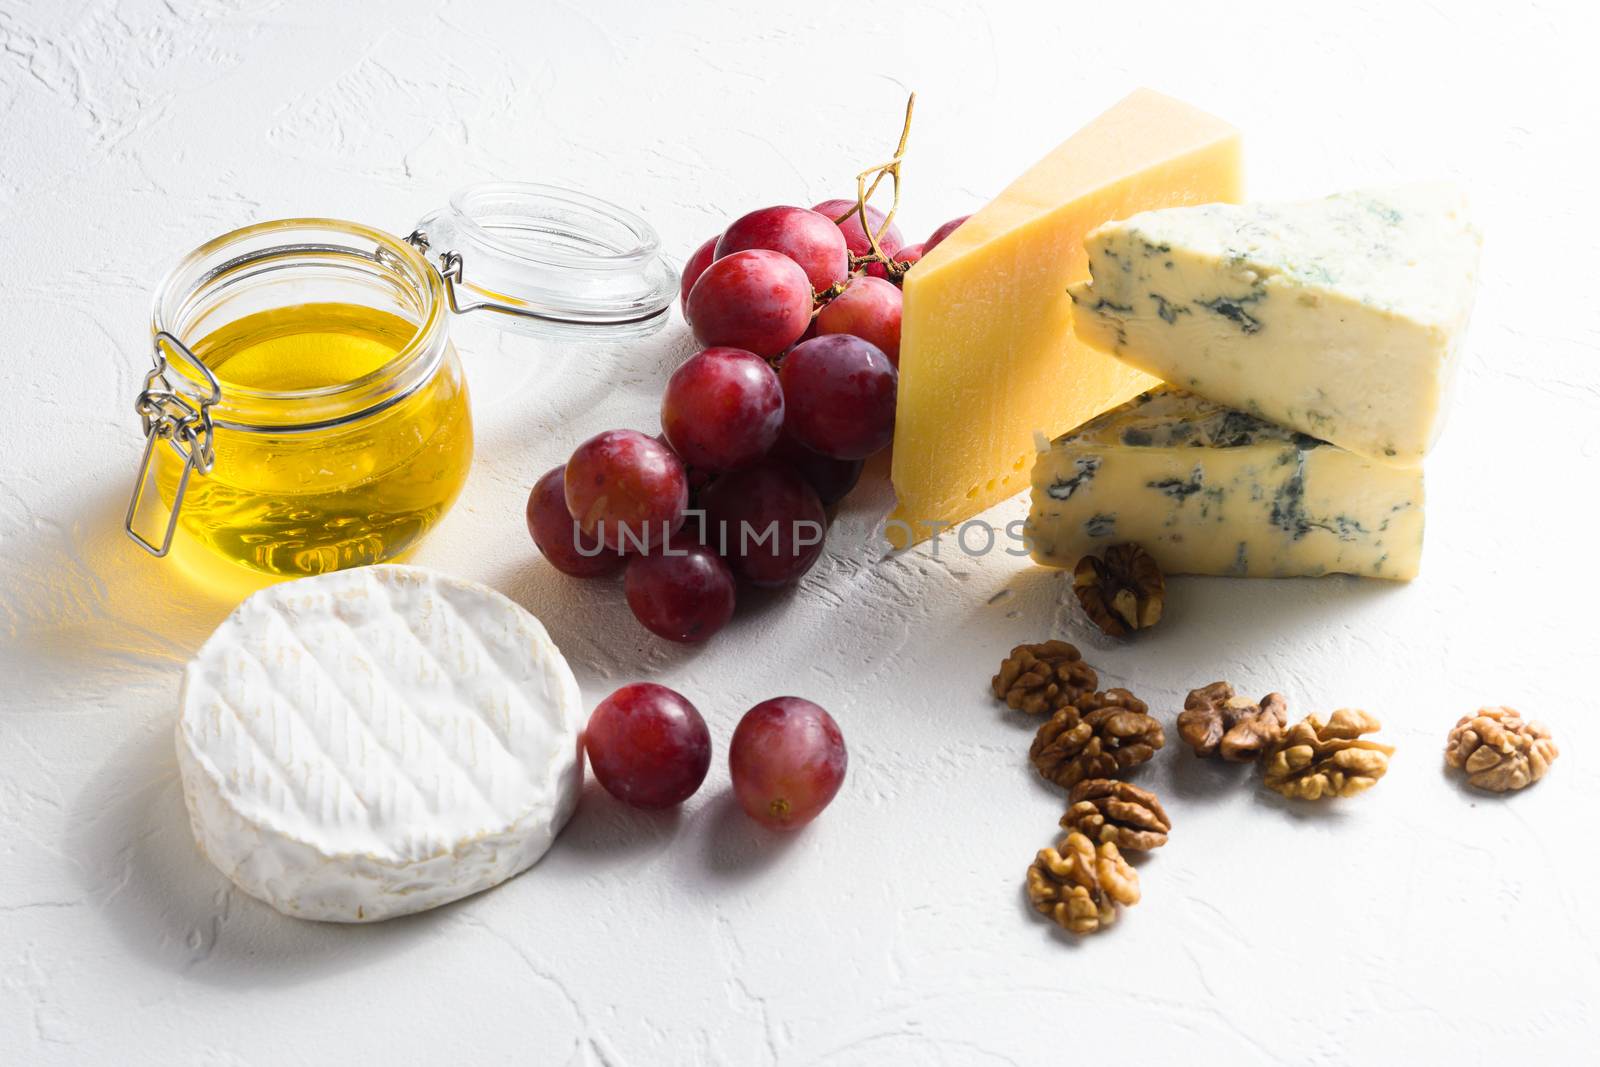 ssorted cheeses, grapes, nuts over white background, Italian and franch cheese and fruit platter with honey and wine. side view by Ilianesolenyi